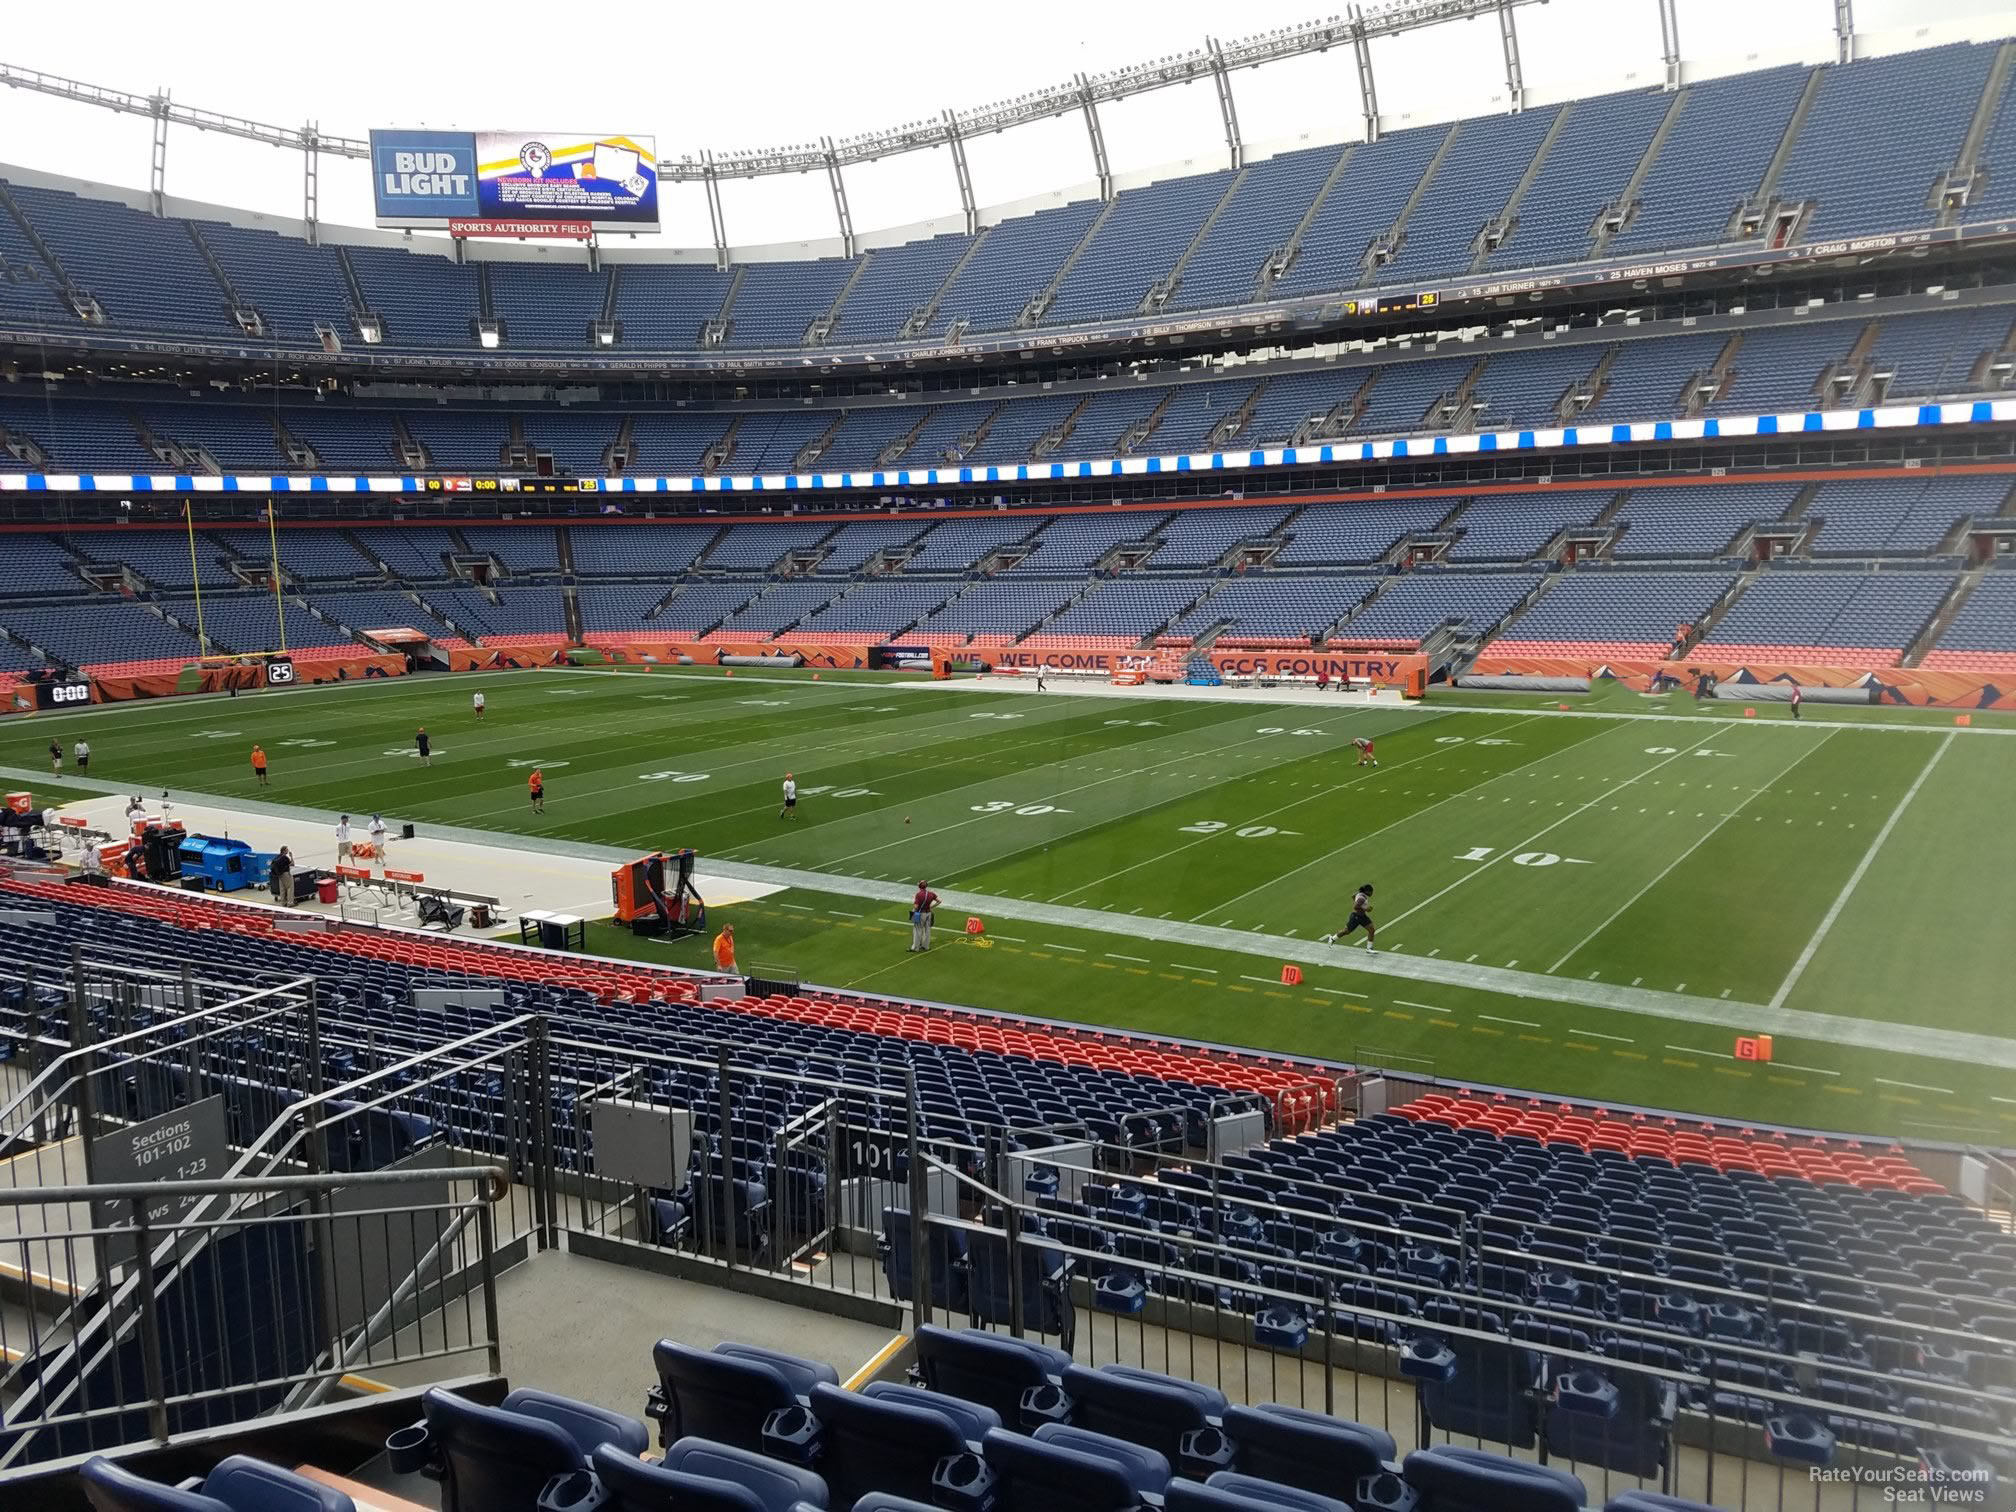 section 101, row 30 seat view  - empower field (at mile high)